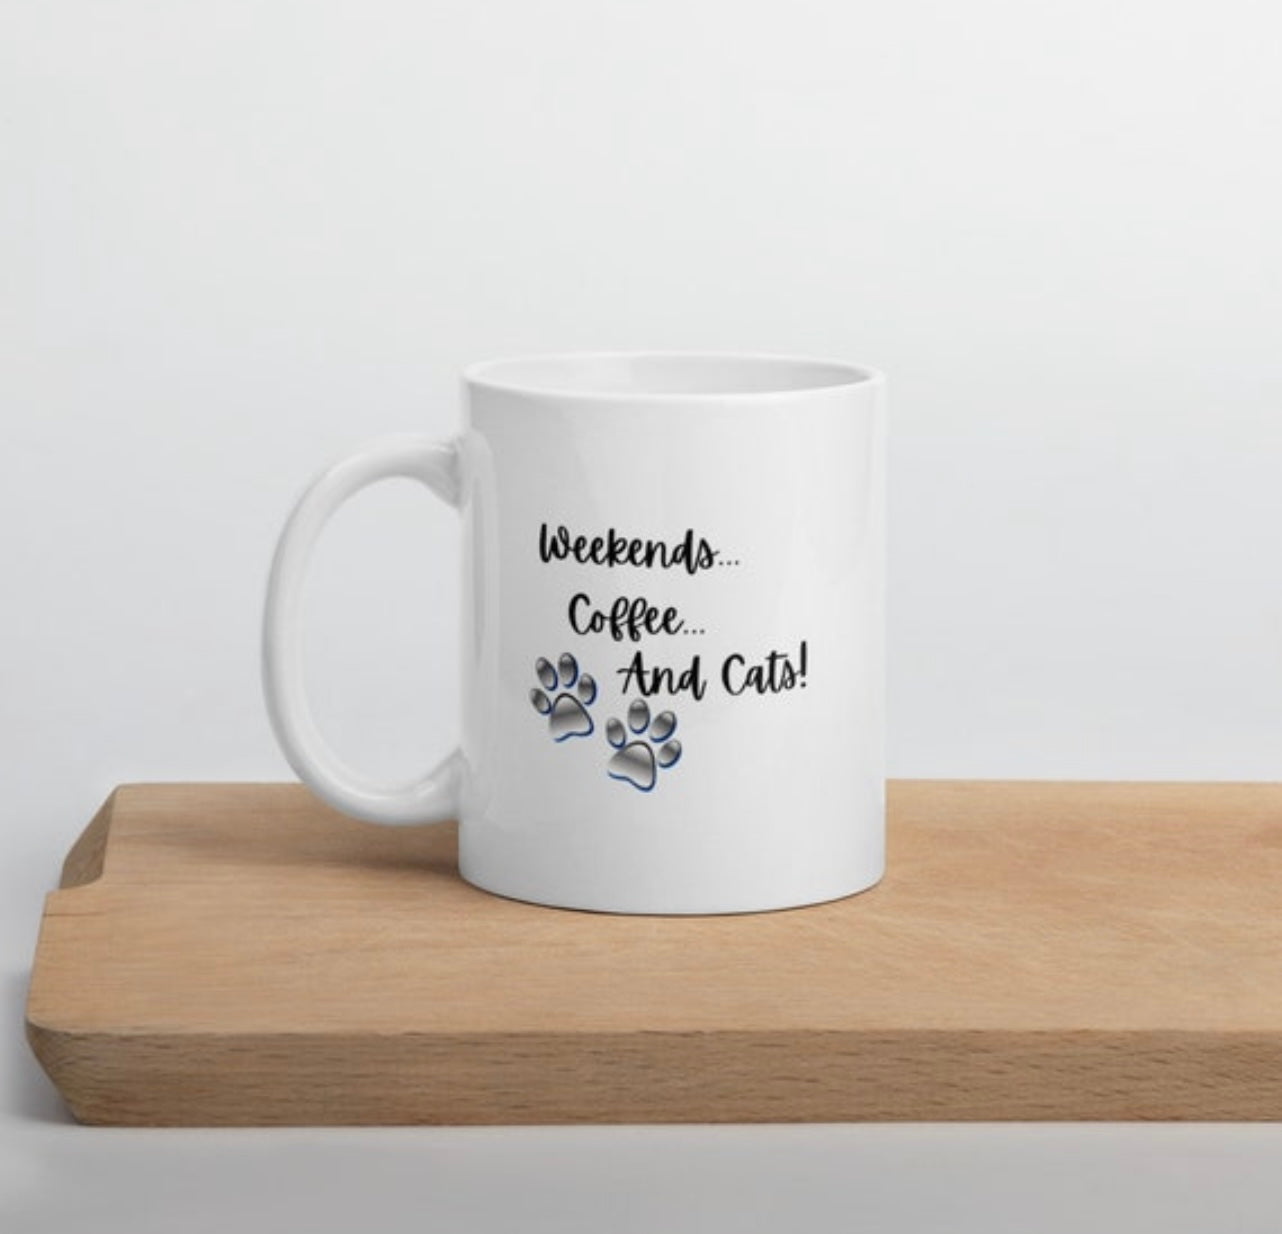 “WEEKENDS, COFFEE AND CATS” COFFEE CUP